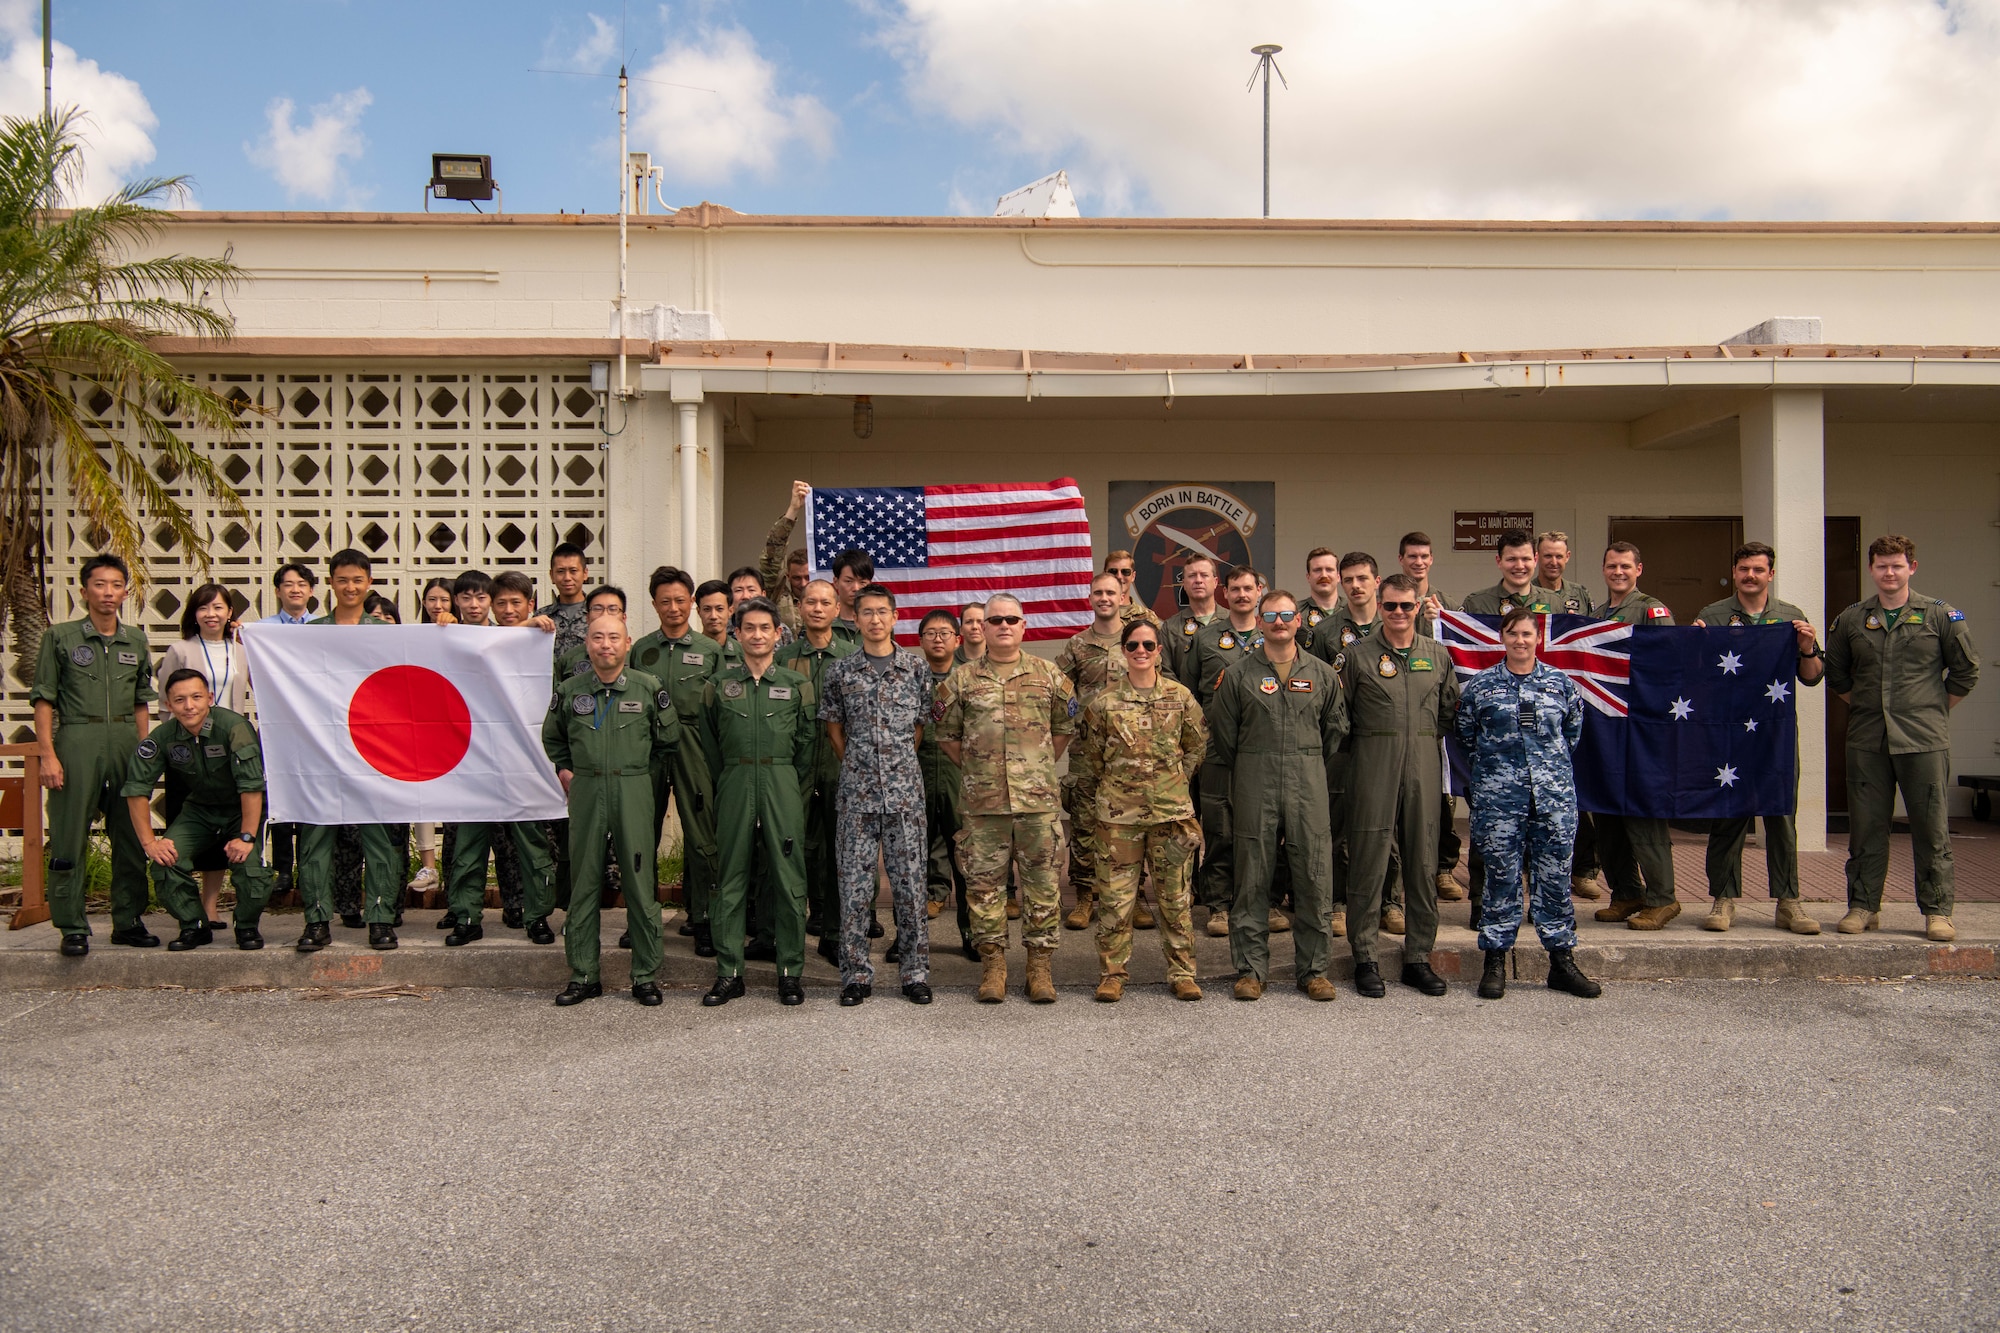 Japanese, Australian, and U.S. military service members pose for a photo.